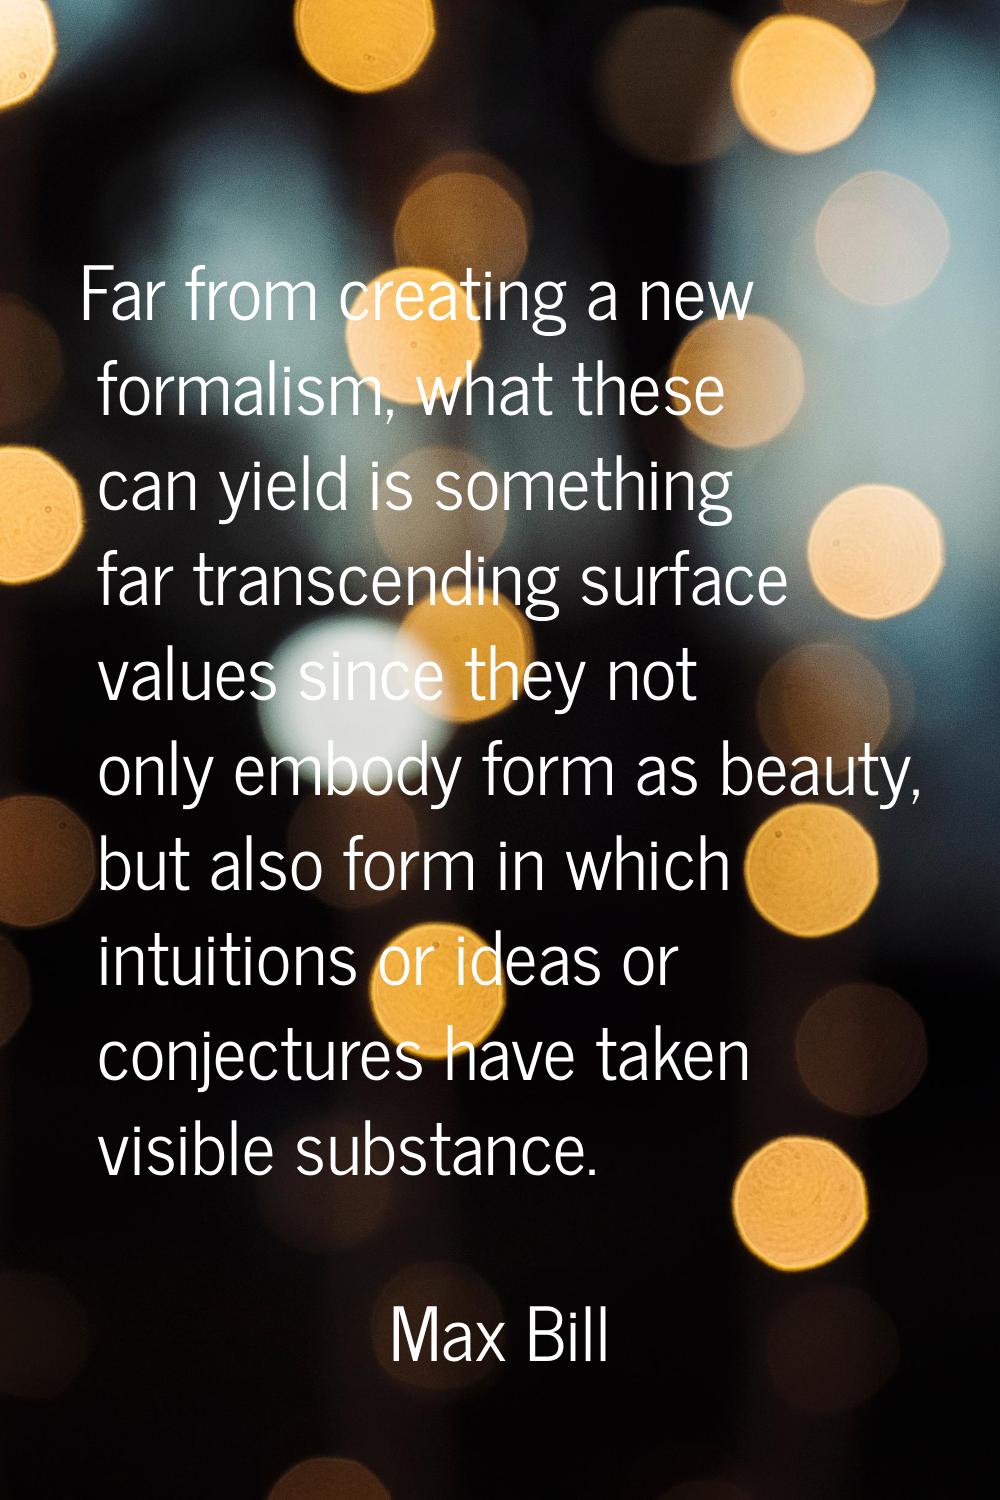 Far from creating a new formalism, what these can yield is something far transcending surface value